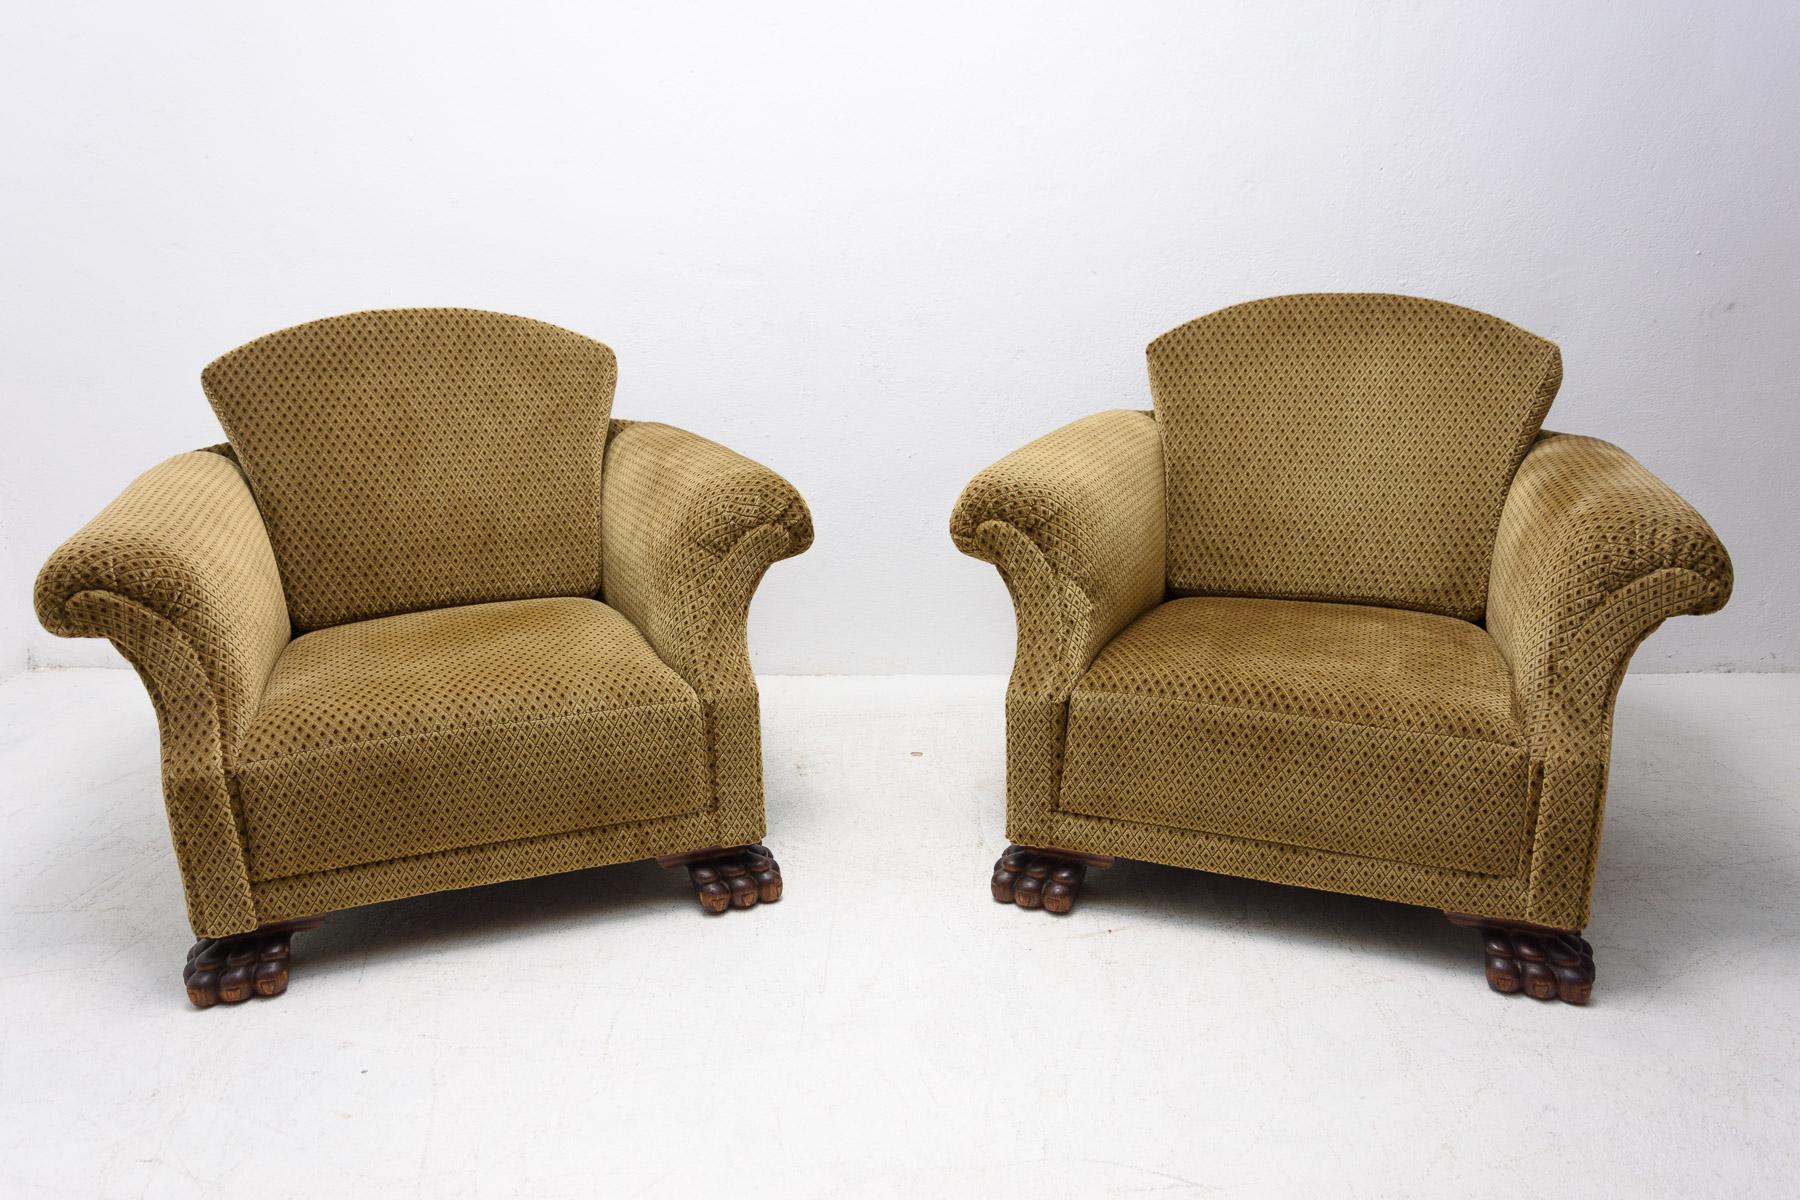 Pair of fantastic Art Deco armchairs from the 1930´s. New upholstery, carved legs in the shape of a lion’s paw.

In excellent condition.

Dimensions: height: 86 cm, width 106 cm, depth 85 cm.

Price is for the pair.